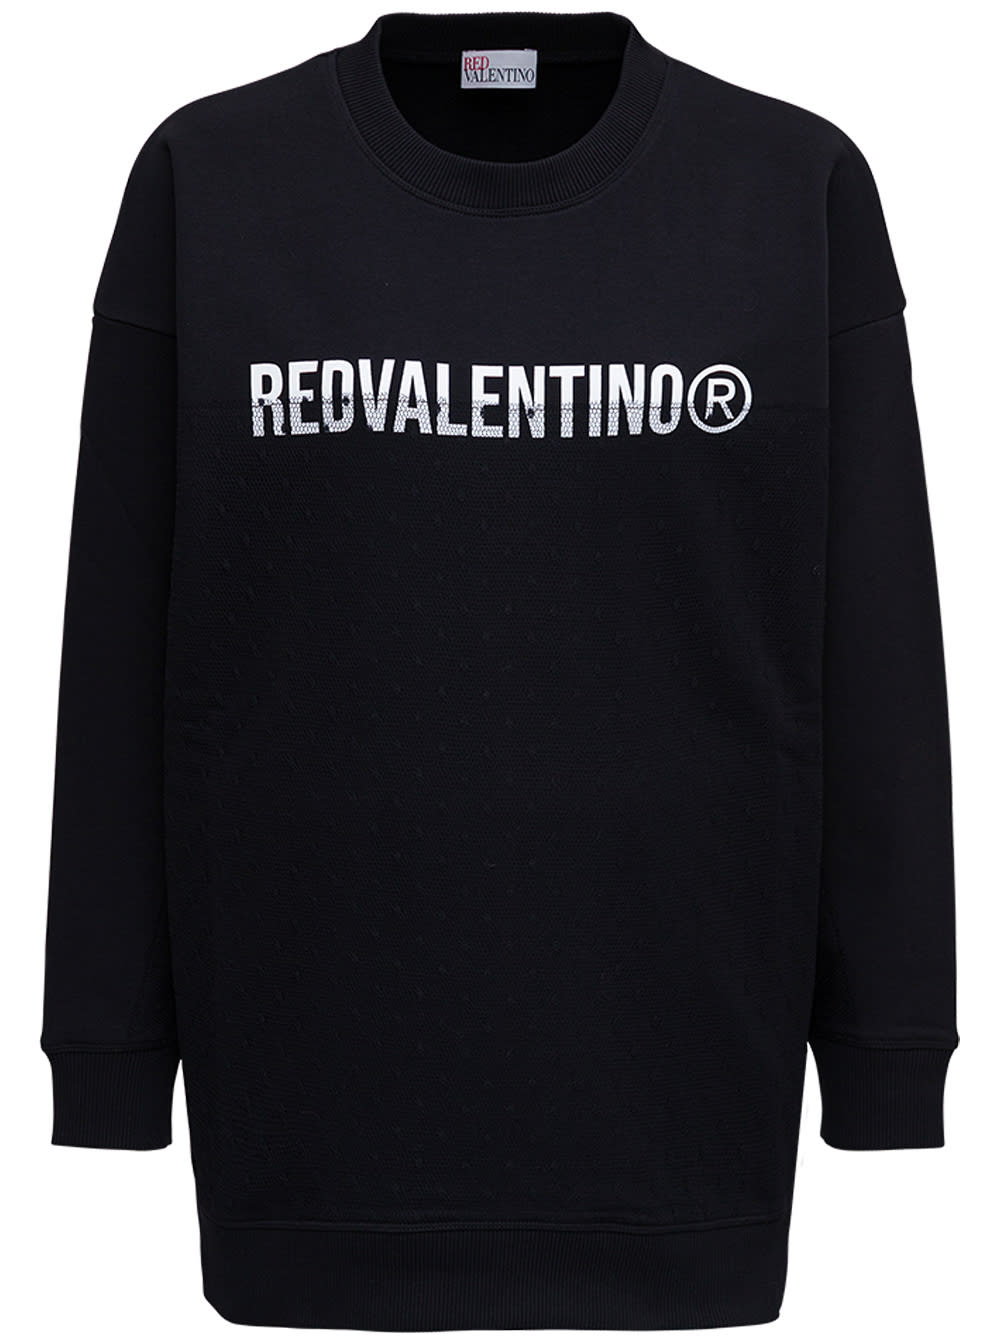 RED Valentino Oversized Black Sweatshirt With Contrasting Logo Print And Point Desprit Insert